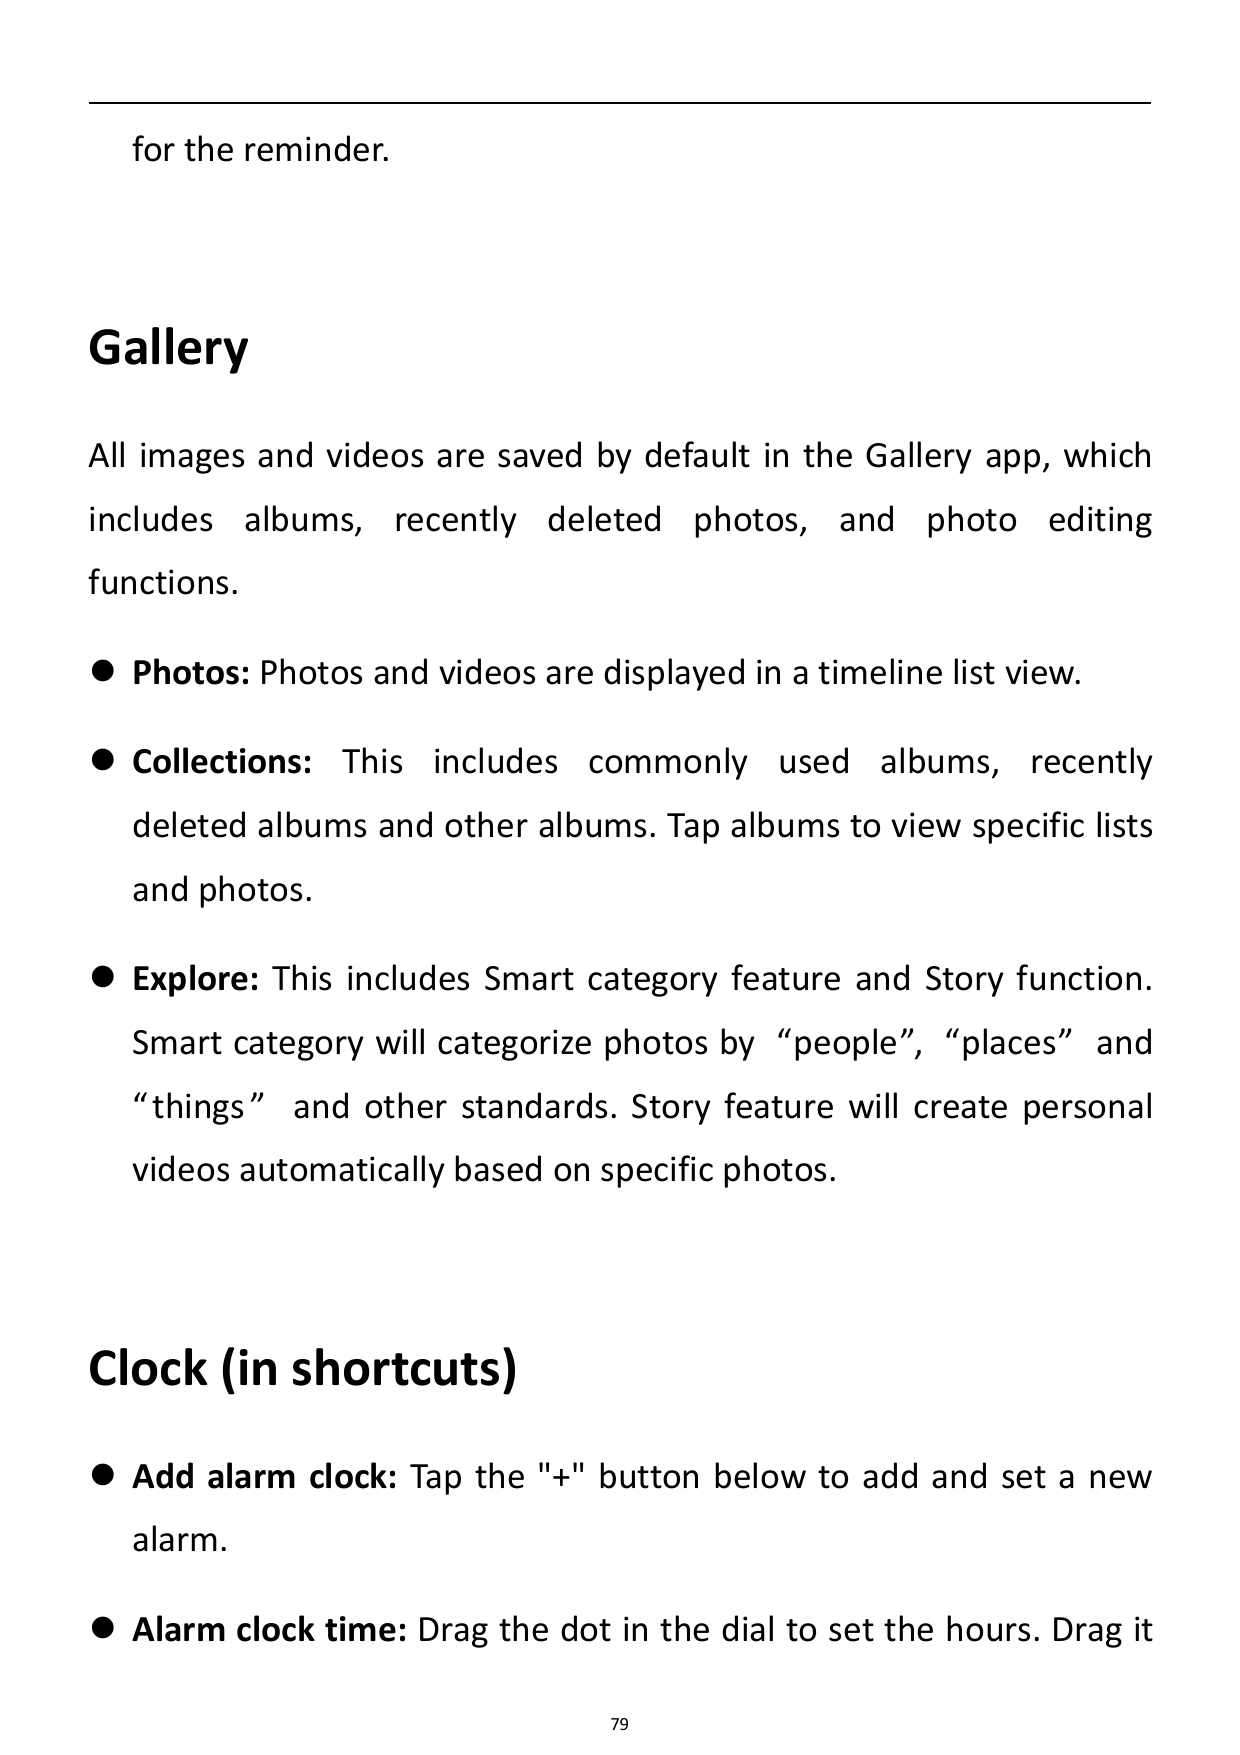 for the reminder.GalleryAll images and videos are saved by default in the Gallery app, whichincludes albums, recently deleted ph